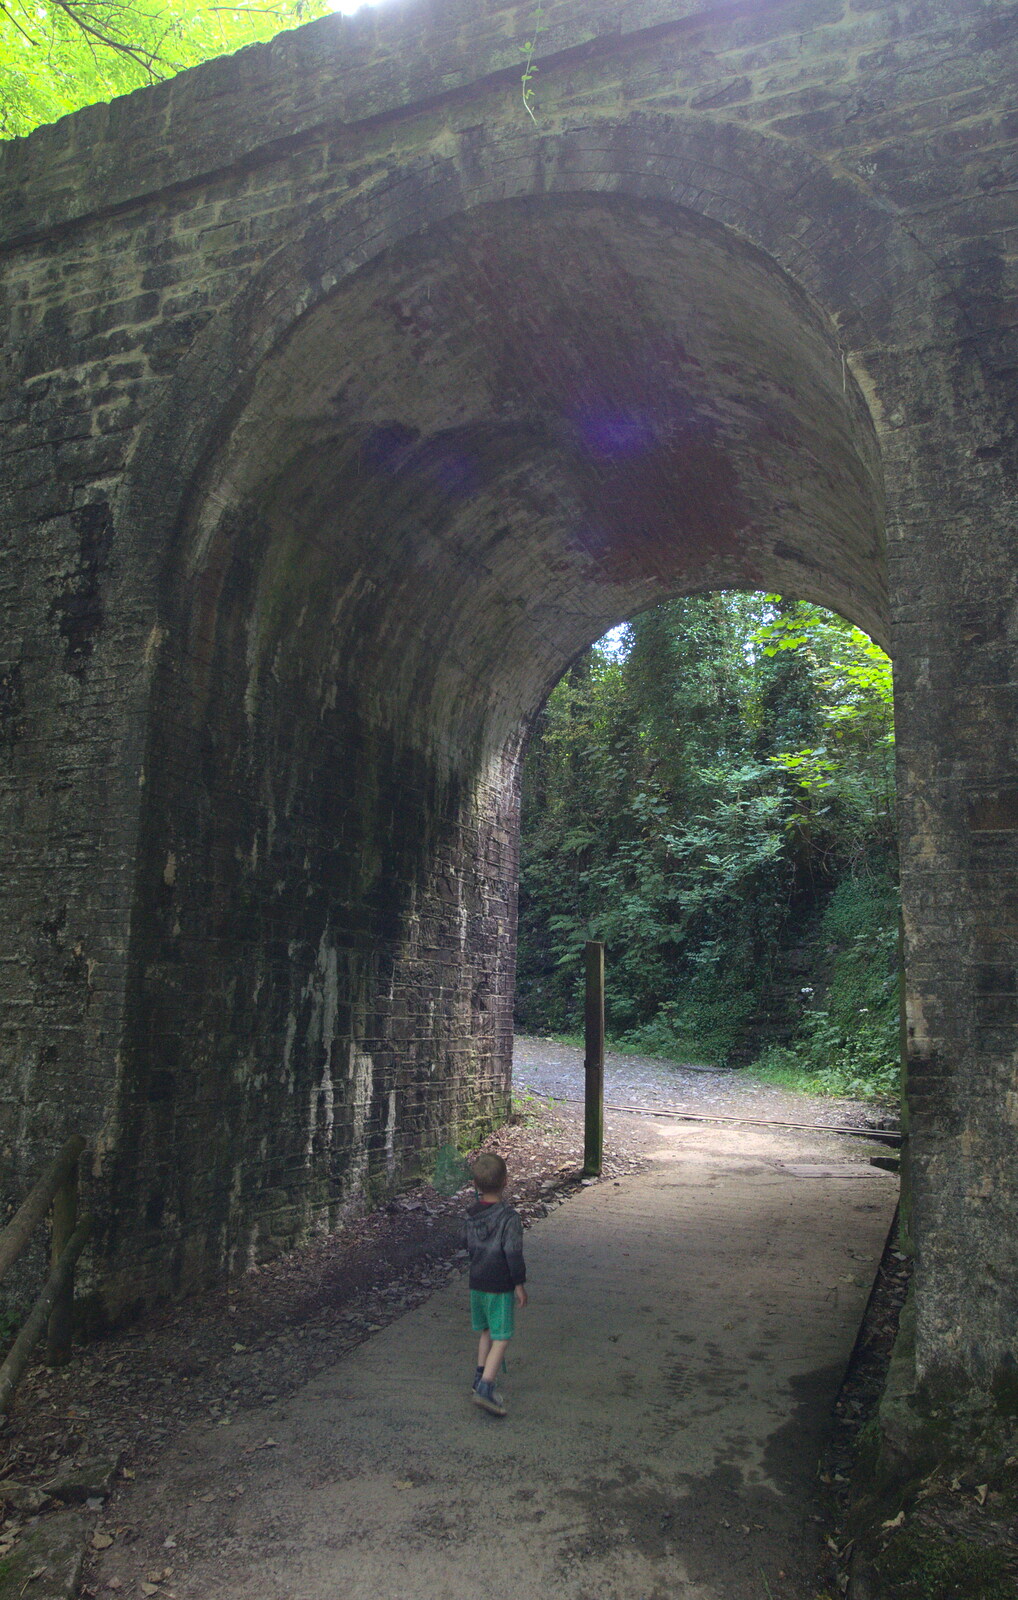 Harry under a railway bridge from Finch's Foundry and Lydford Gorge, Dartmoor, Devon - 12th August 2016